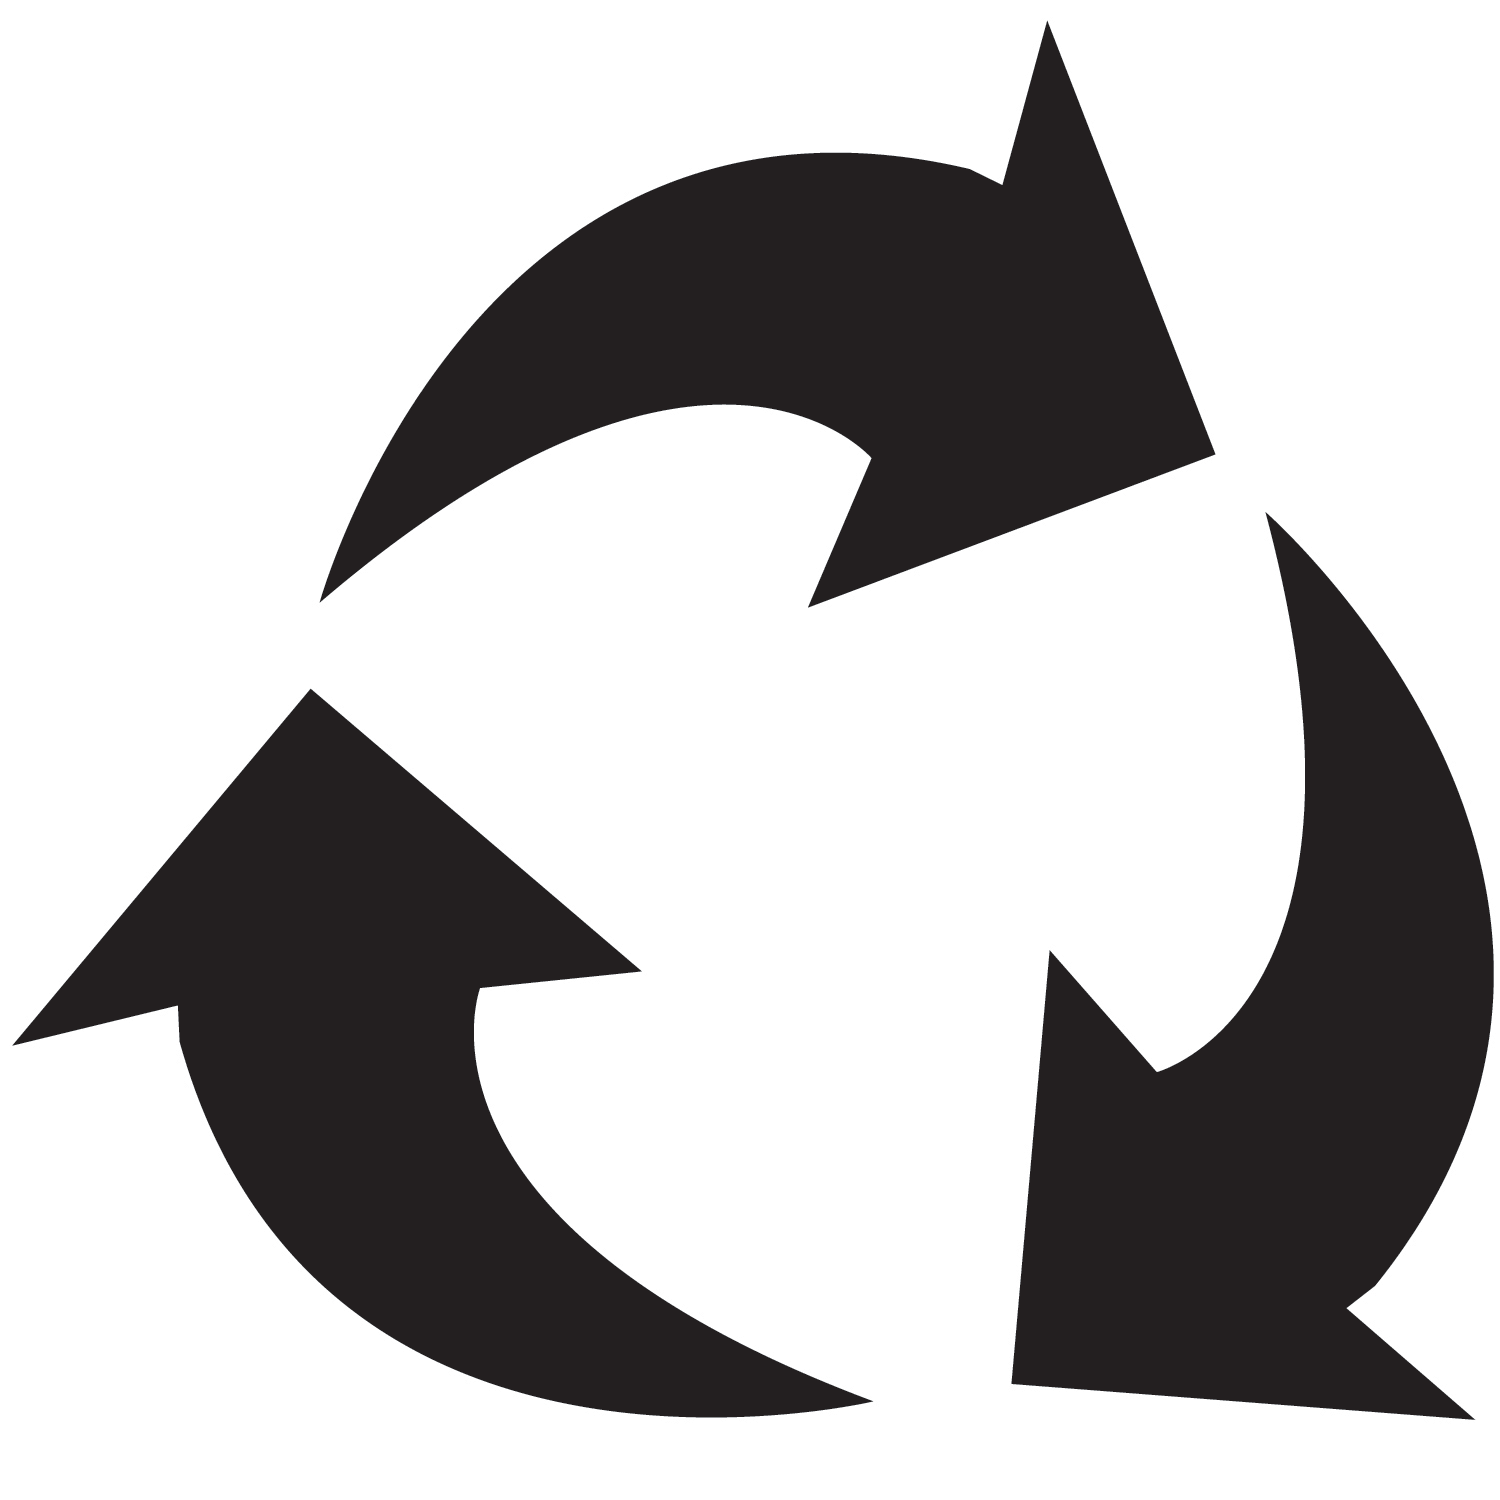 Black Recycle Logo - Free Recycle Logo Png, Download Free Clip Art, Free Clip Art on ...